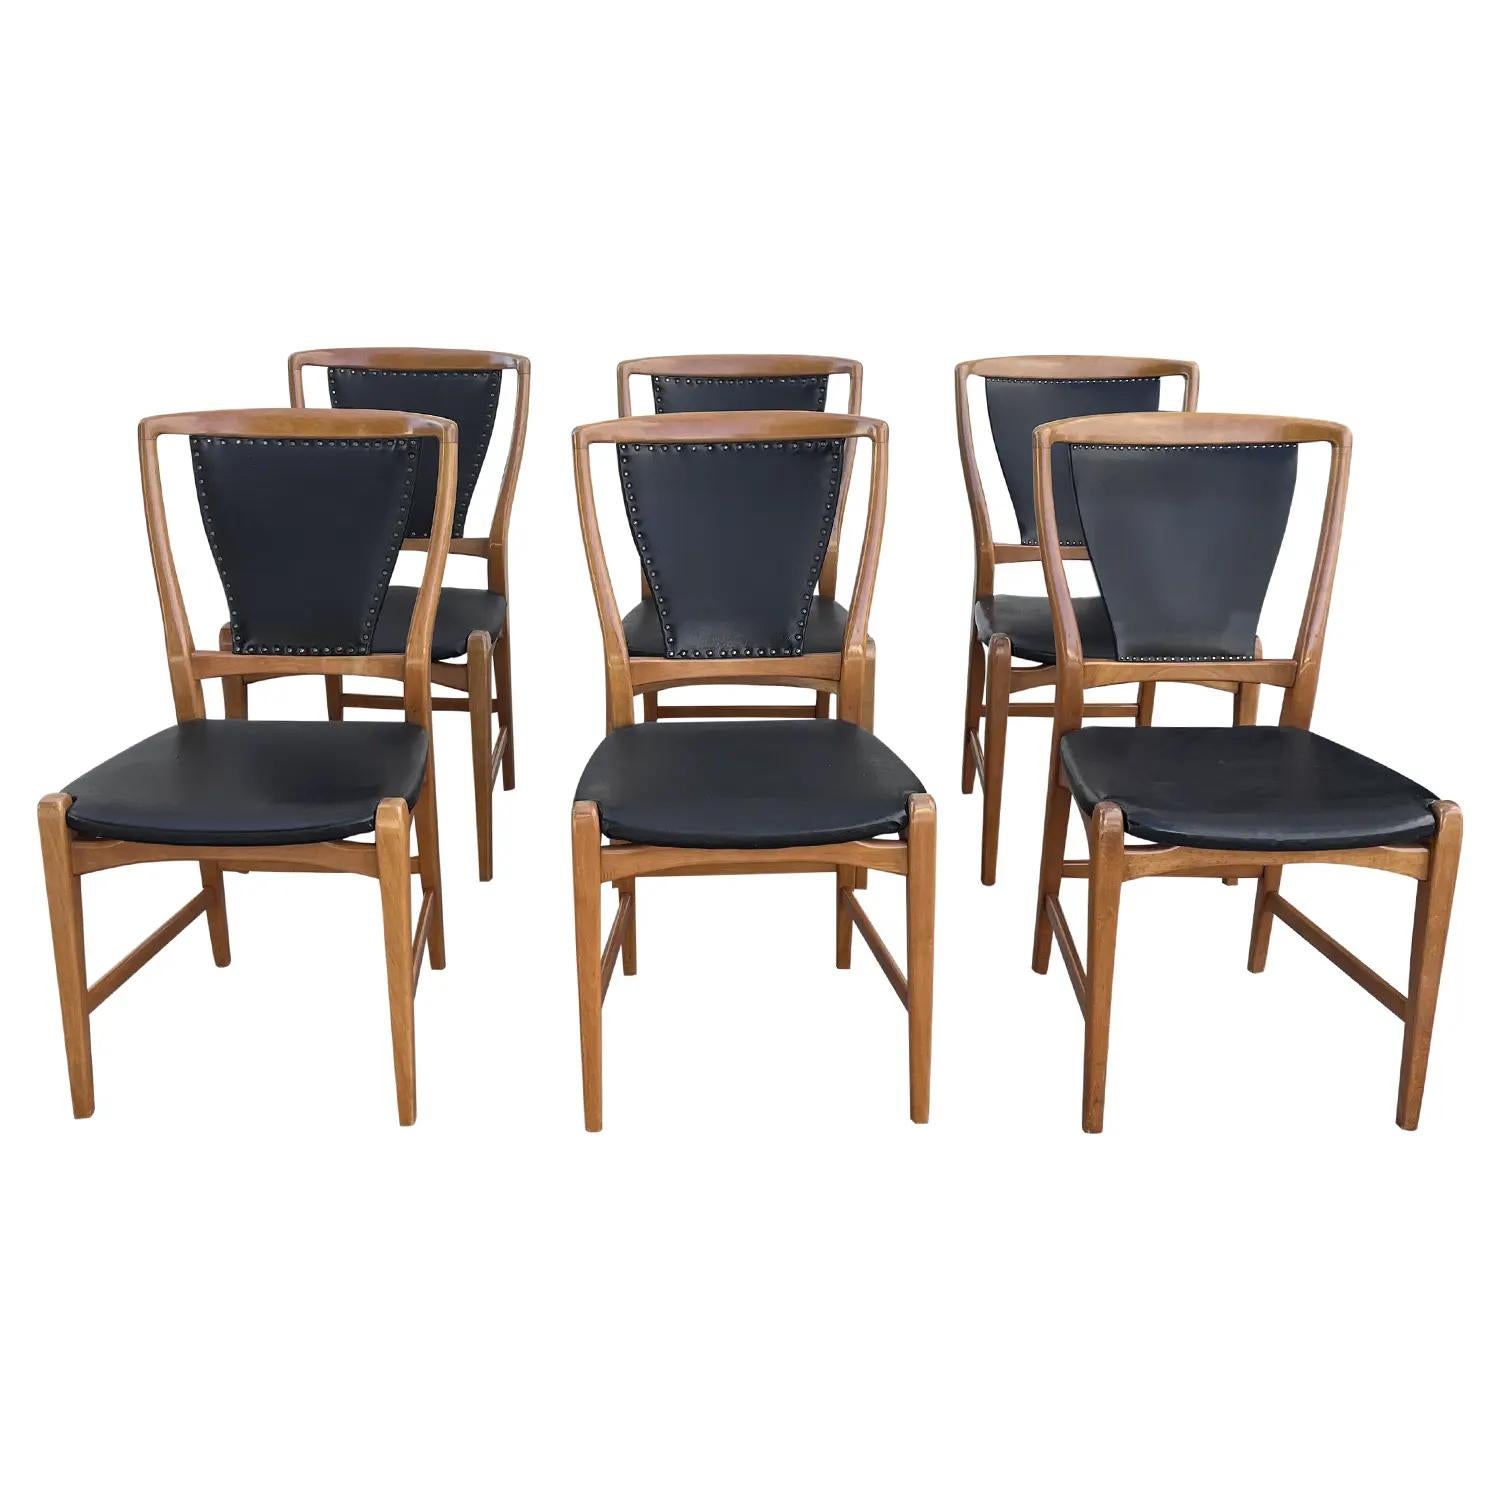 A black, vintage Mid-Century modern Swedish set of six dining chairs made of hand crafted Pearwood, designed and produced by an unknown architect from Stockholm, in good condition. The seat, back rest of the Scandinavian side chairs are upholstered